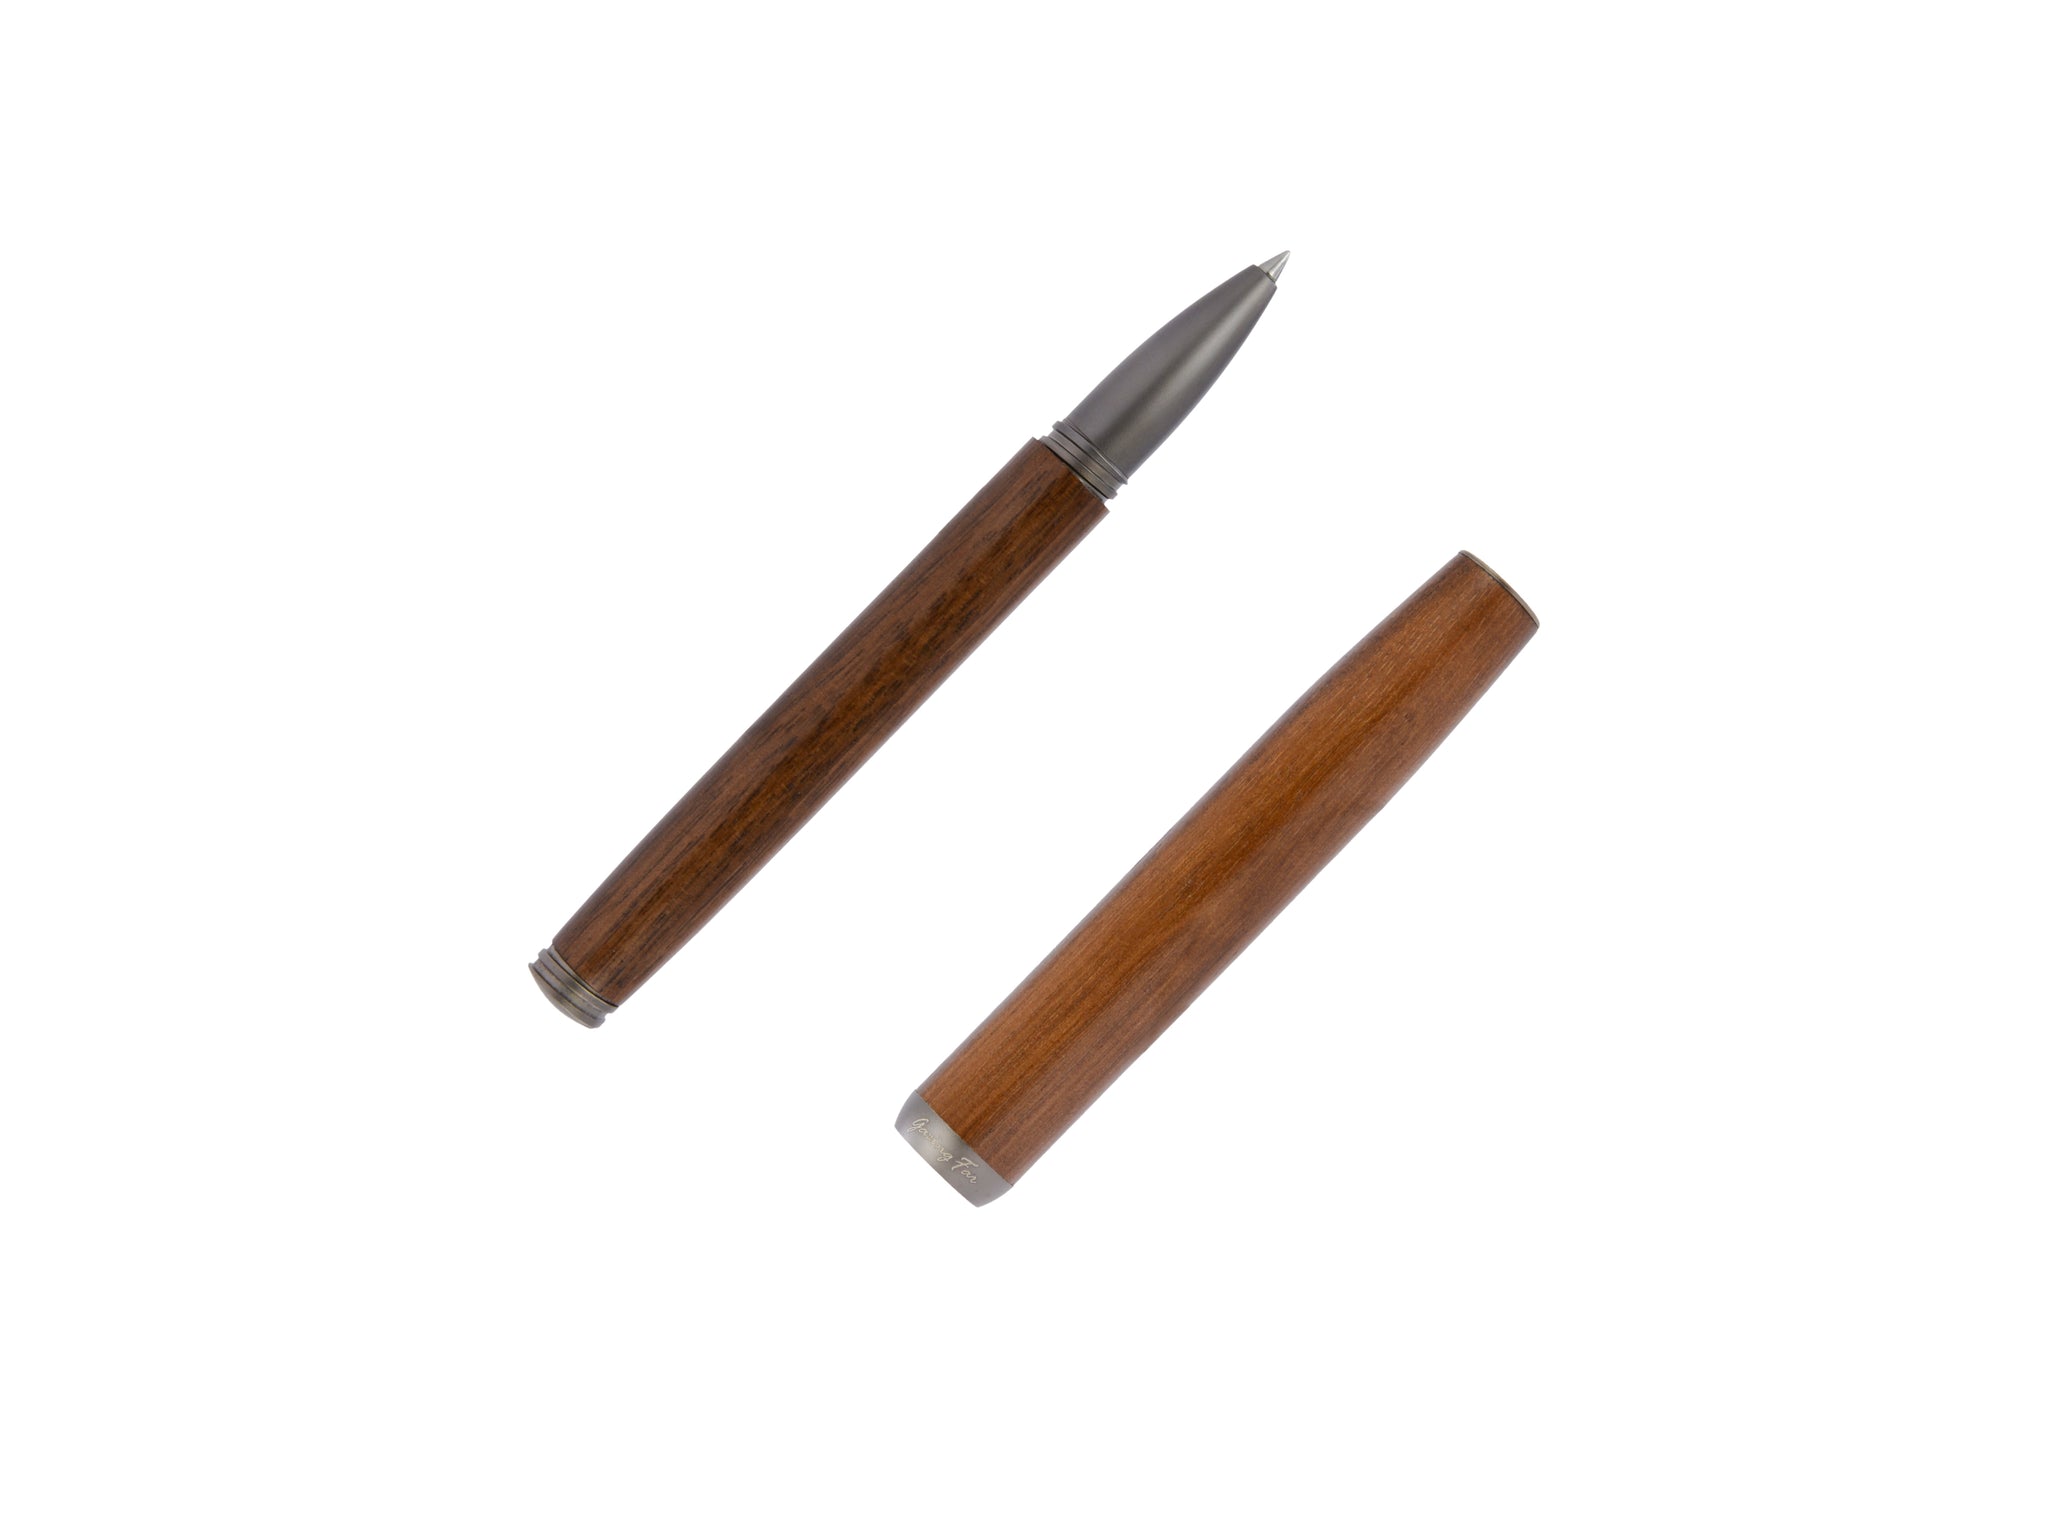 tmX , the most tiny wooden fountain pen from Gazing Far.